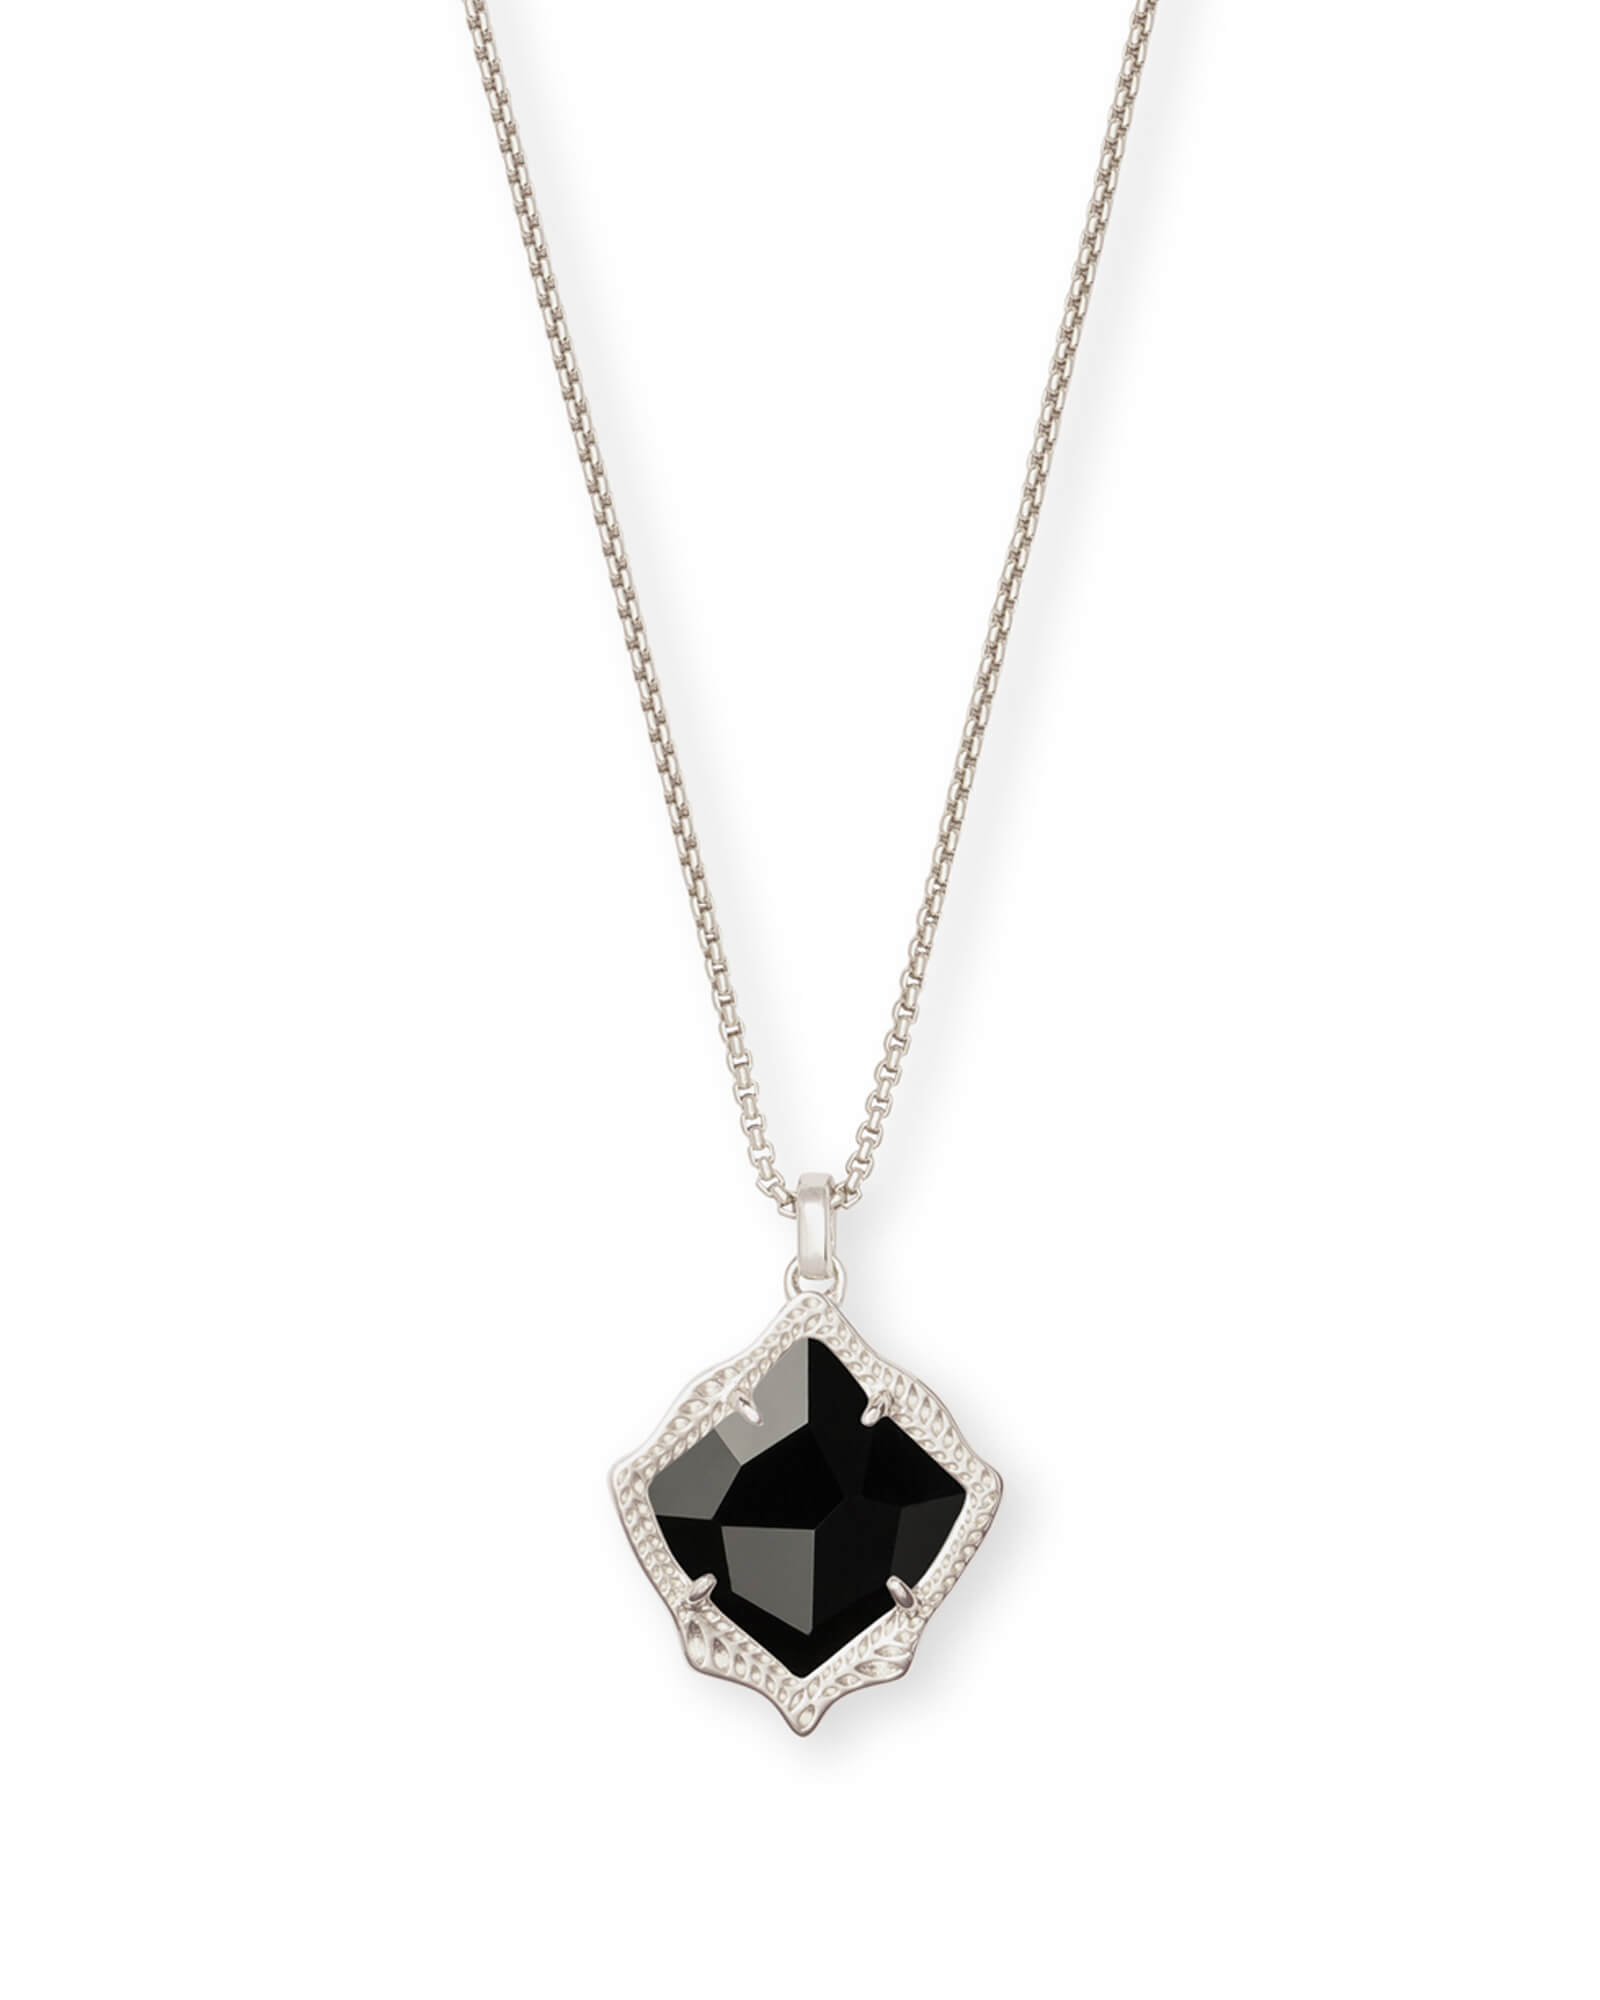 Kacey Silver Long Pendant Necklace in Black Opaque Glass | Kendra Scott